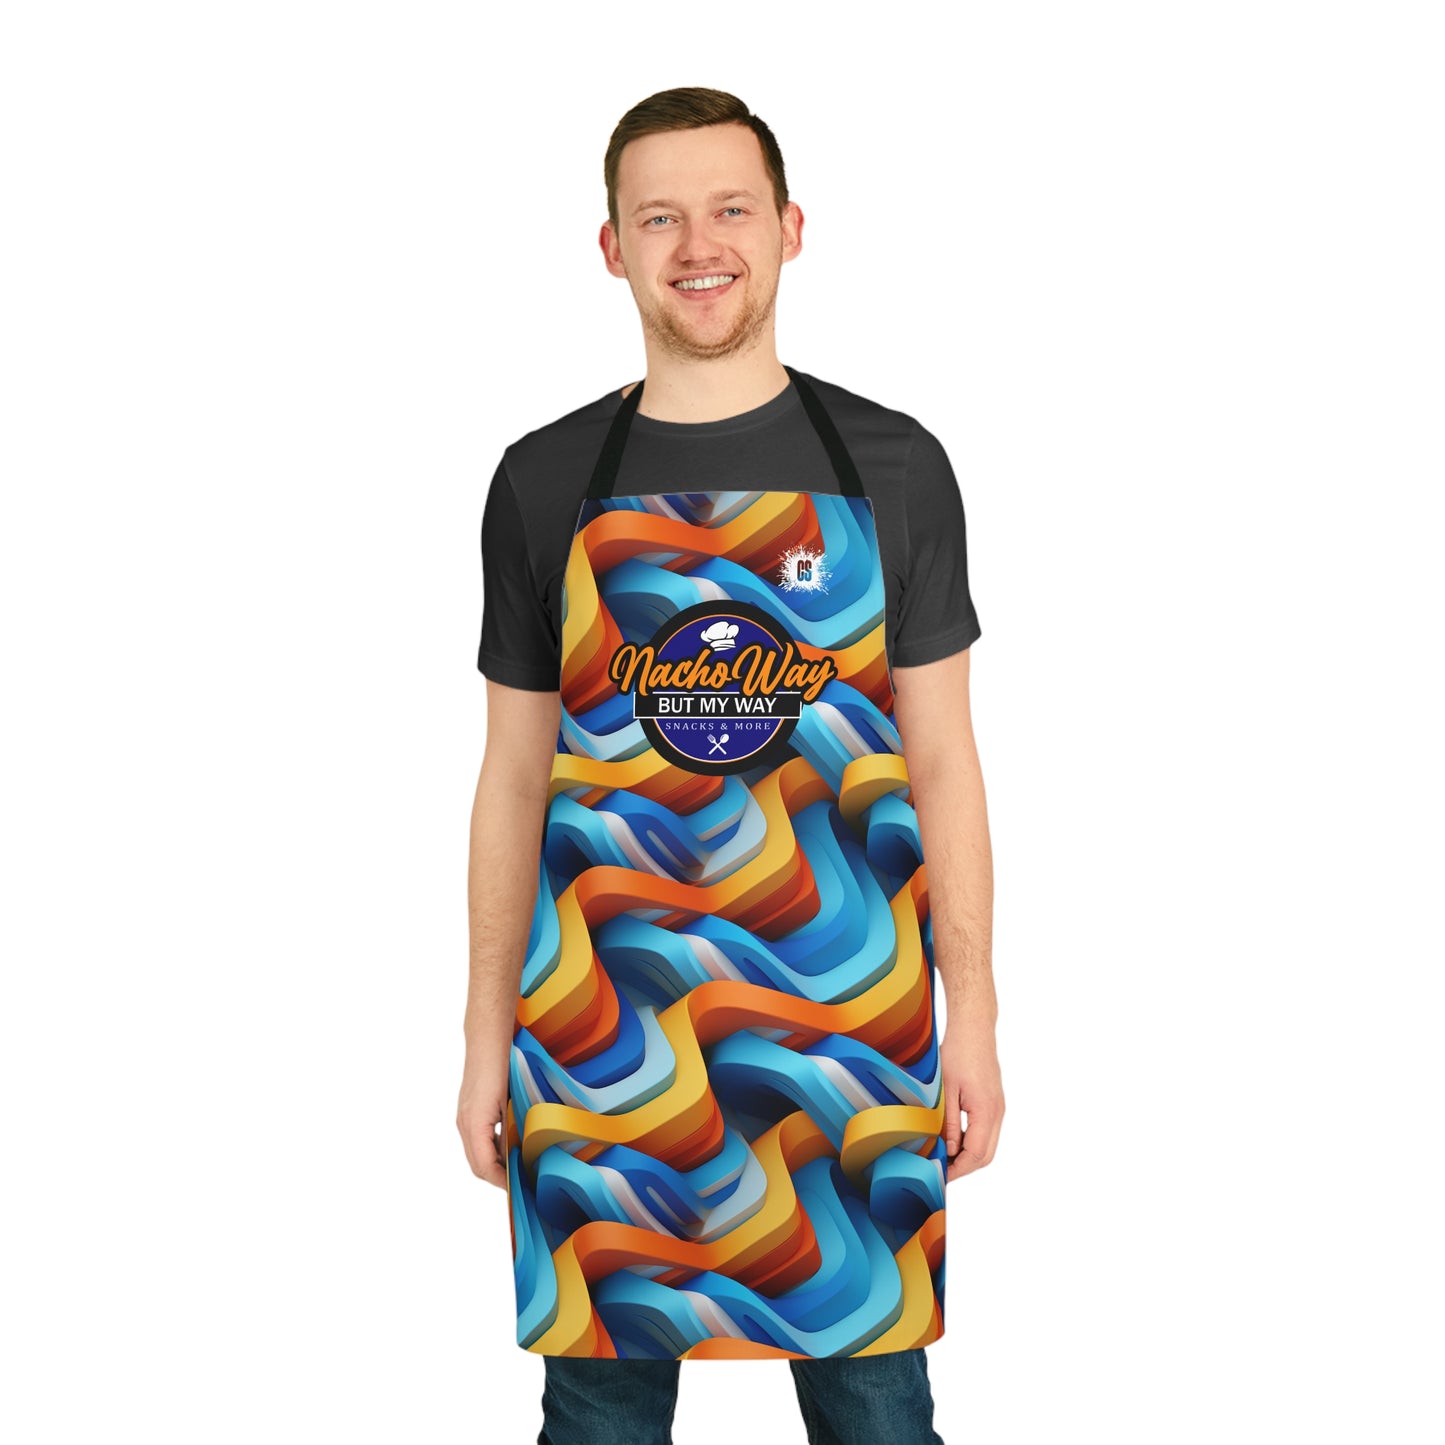 NachoWay “Go With The Flow” Apron